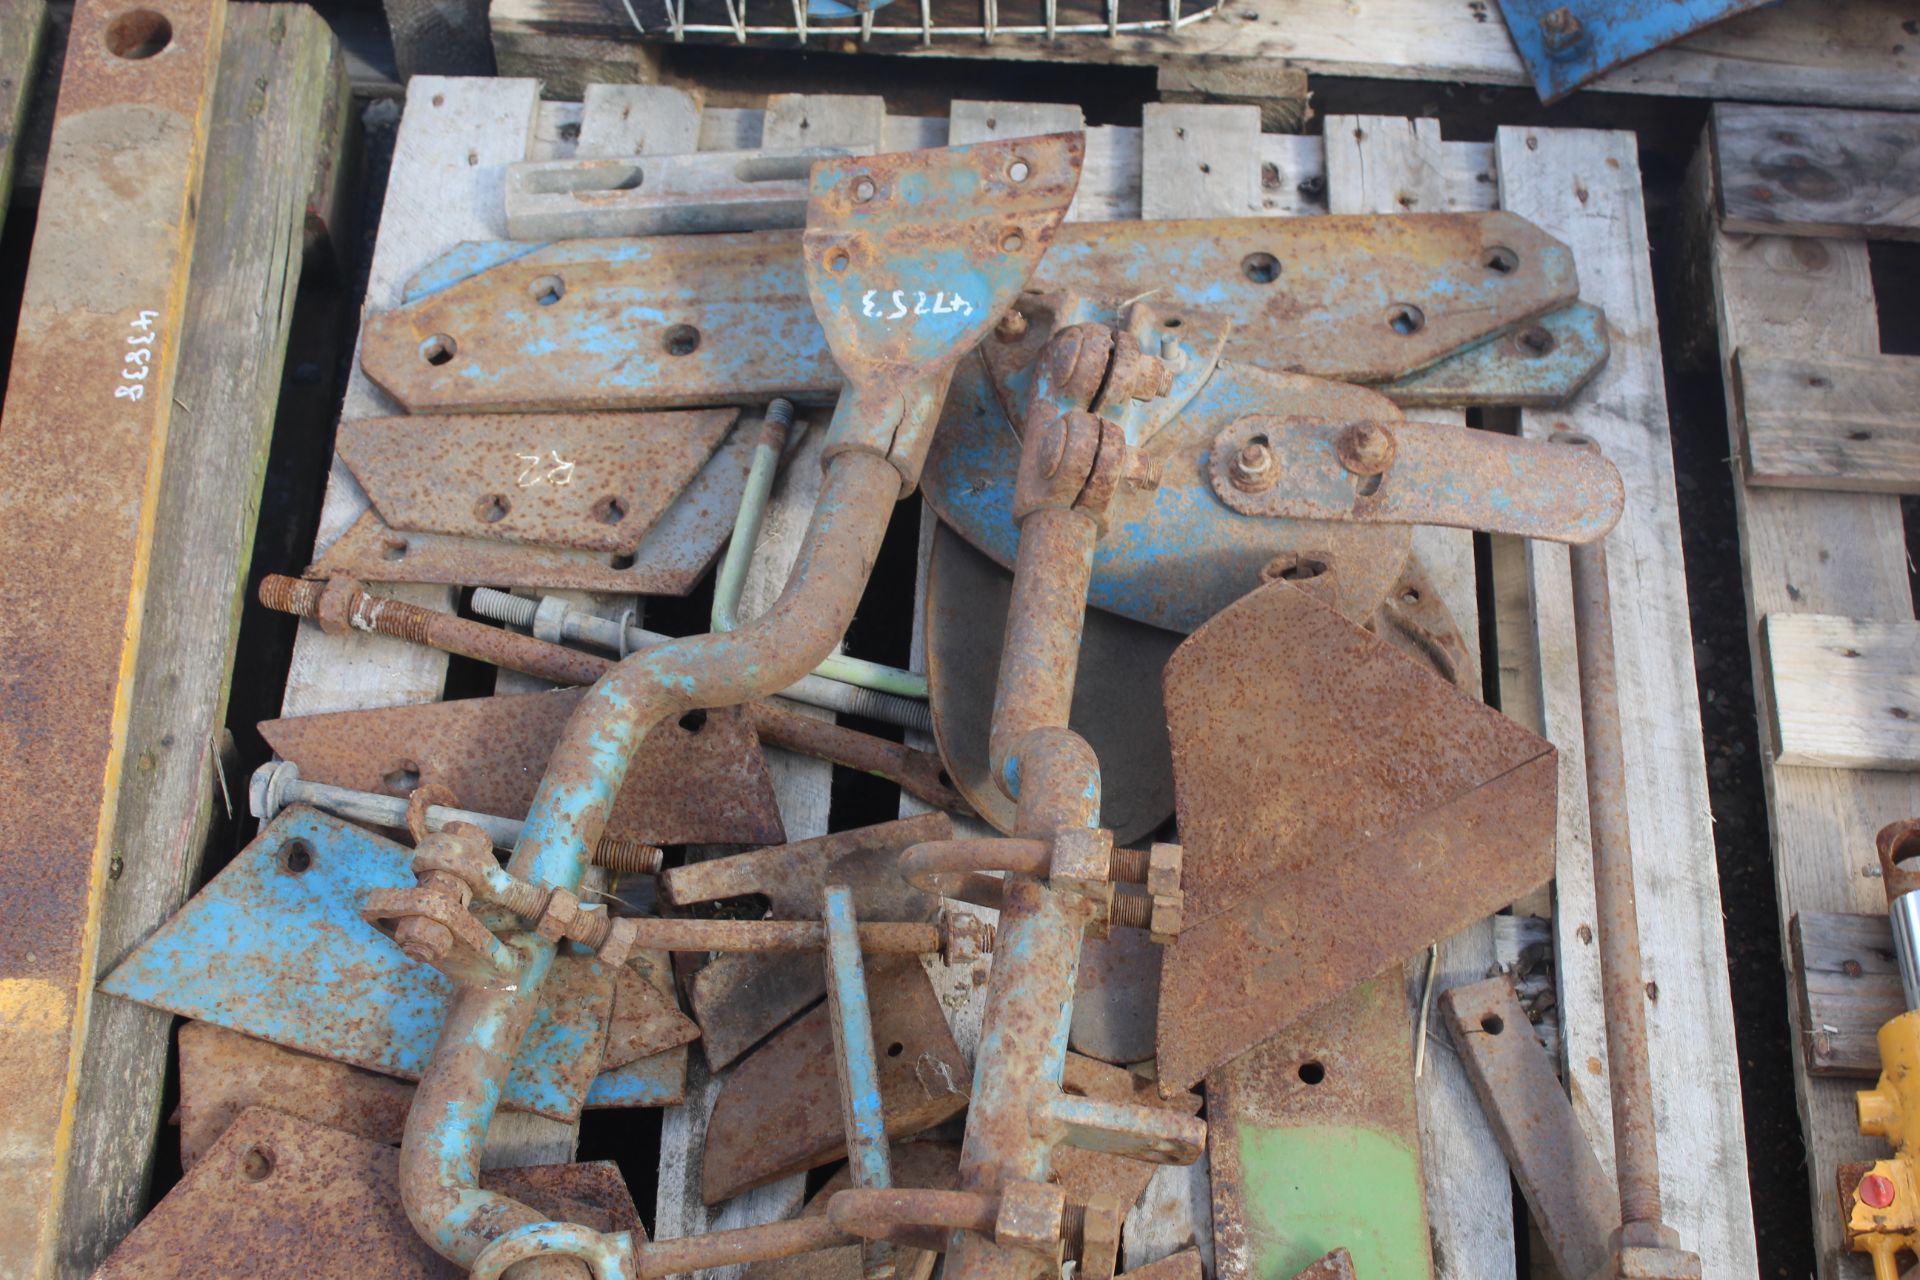 Ransomes plough spares. - Image 3 of 3